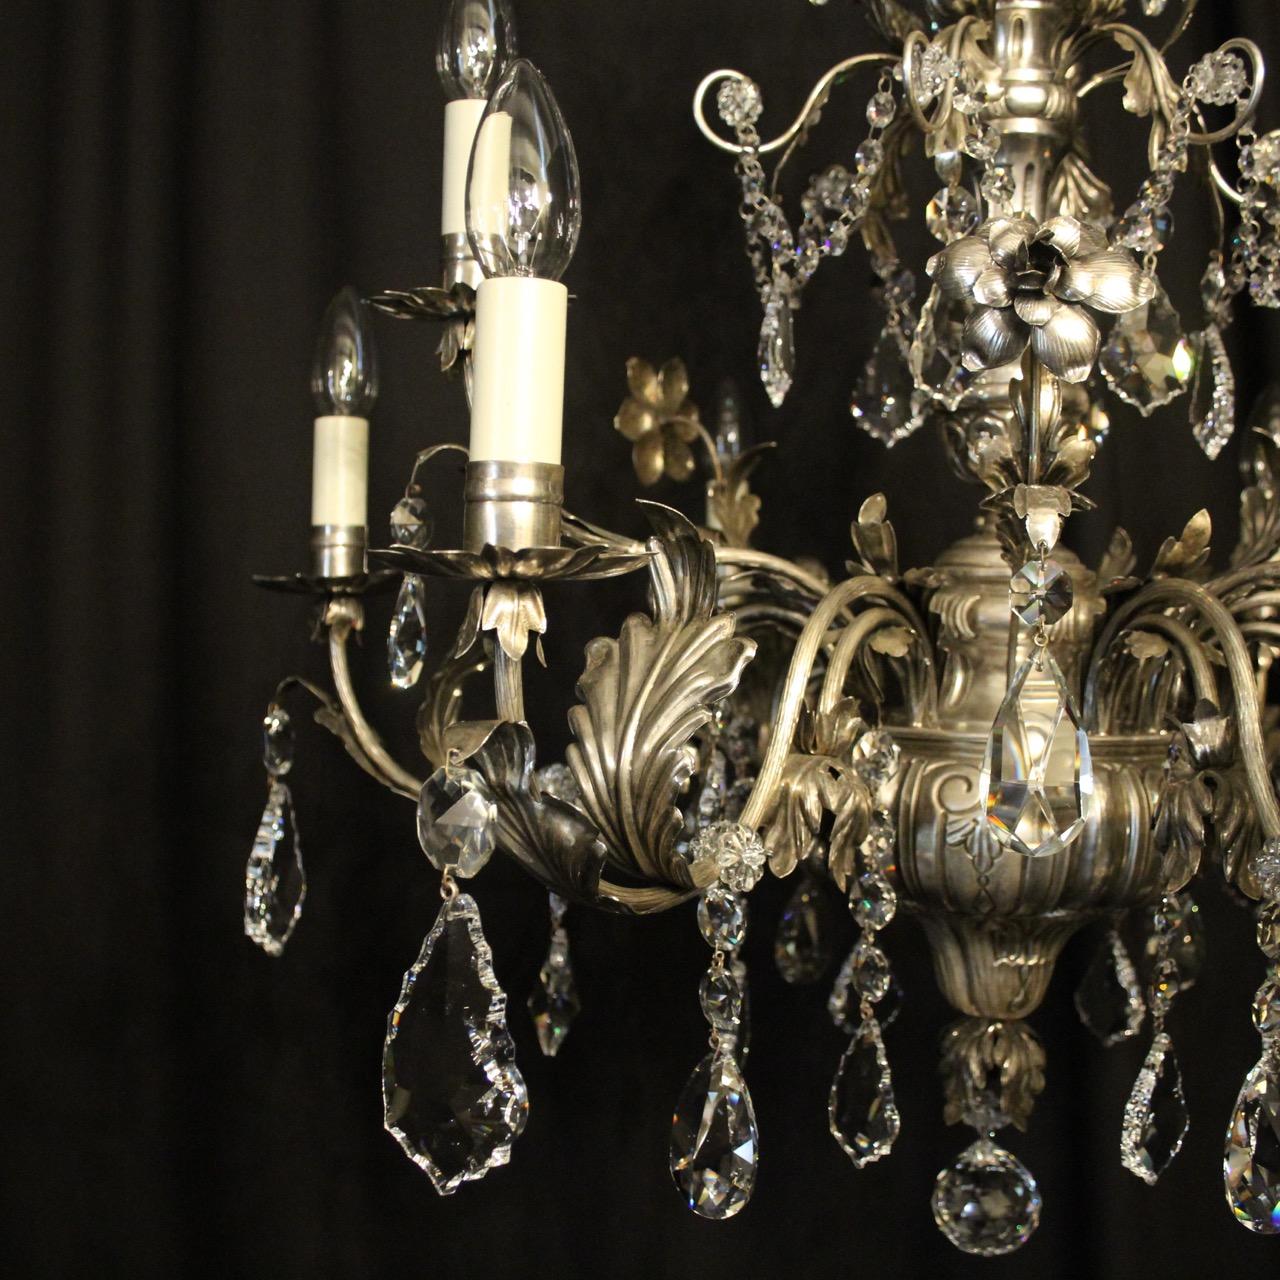 A decorative Italian Genoa silver metal 9-light double tiered chandelier, the reeded Acanthus leaf scrolling arms with pressed drip pans, issuing from a repousse decorated tapering baluster column and decorated overall with quality Swarovski crystal